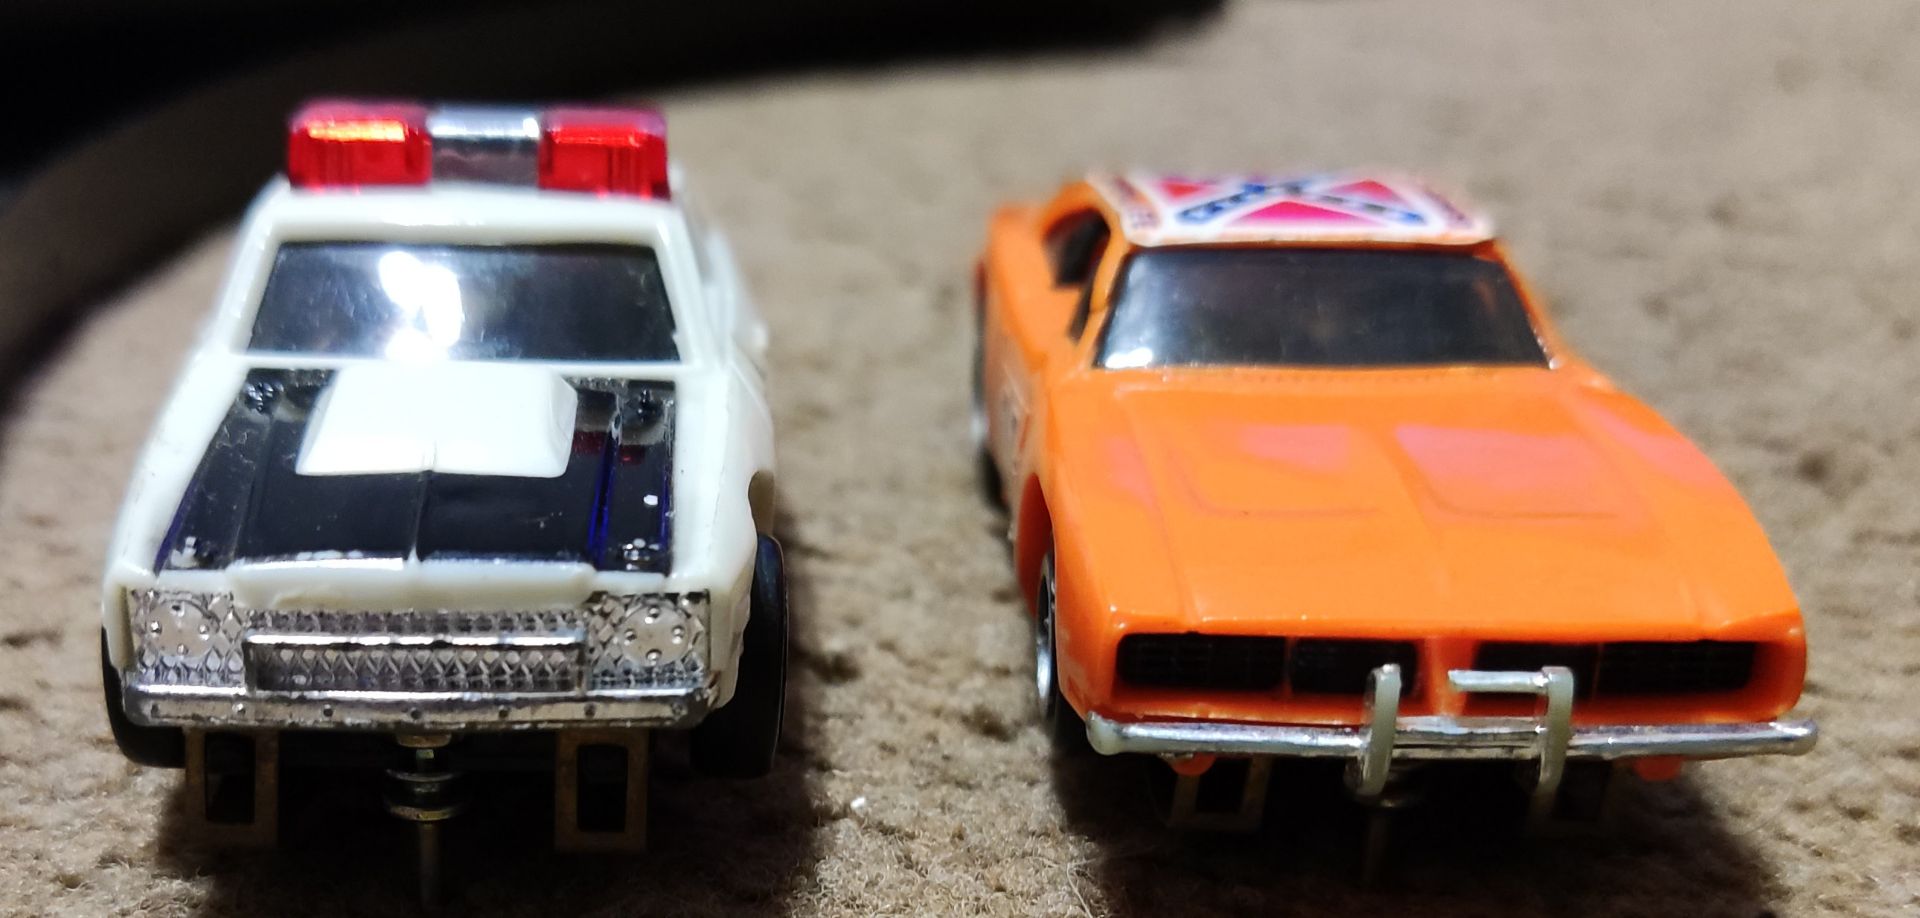 1 x Vintage Dukes of Hazzard Electric Slot Racing Set - Used - CL444 - NO VAT ON THE HAMMER - - Image 11 of 26